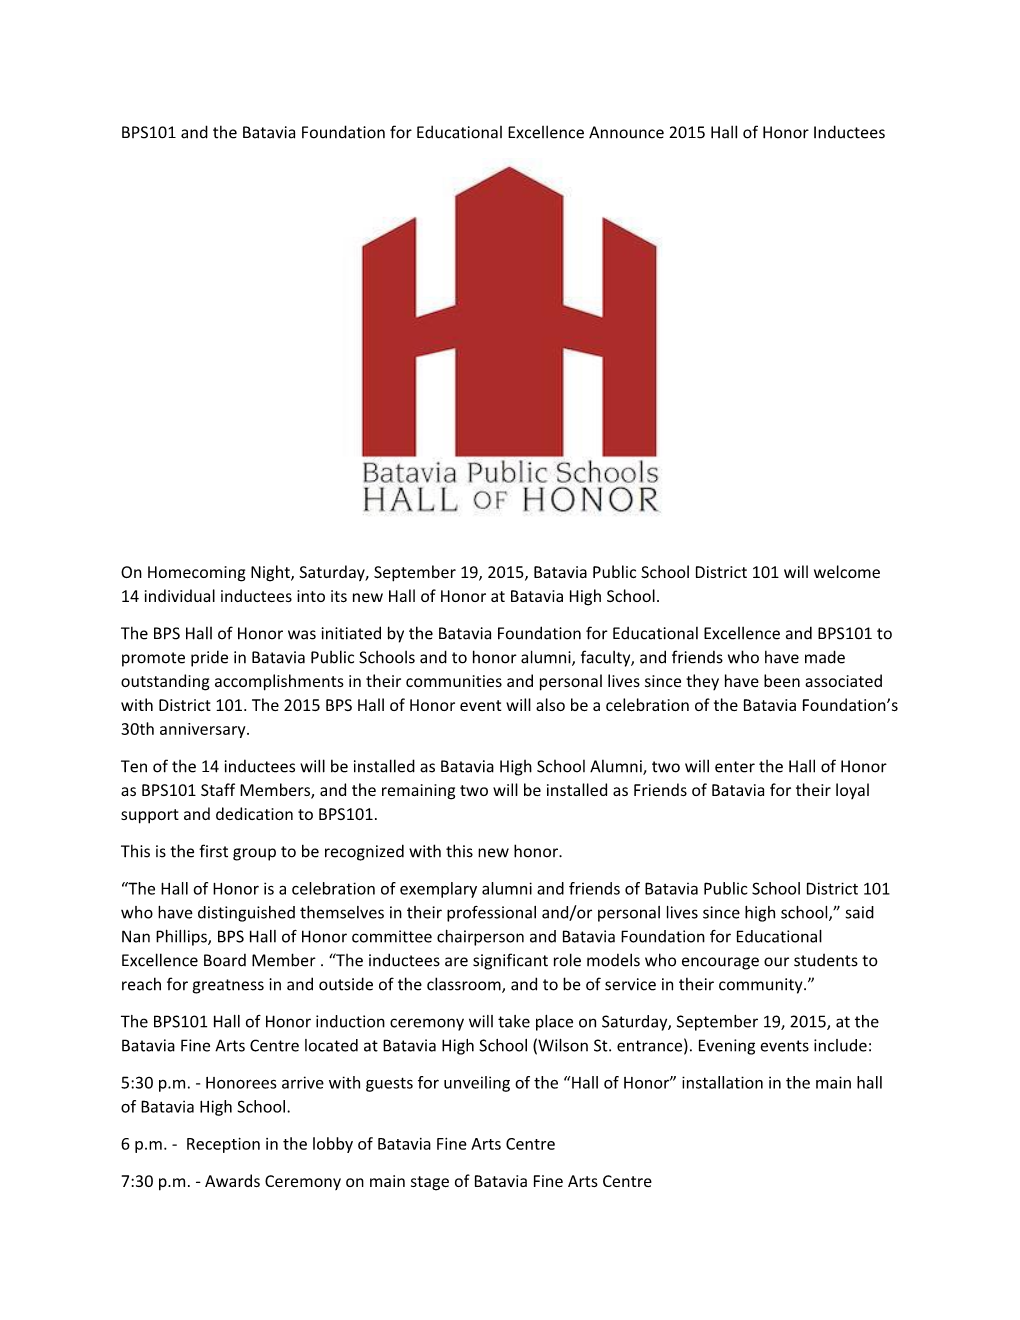 BPS101 and the Batavia Foundation for Educational Excellence Announce 2015 Hall of Honor